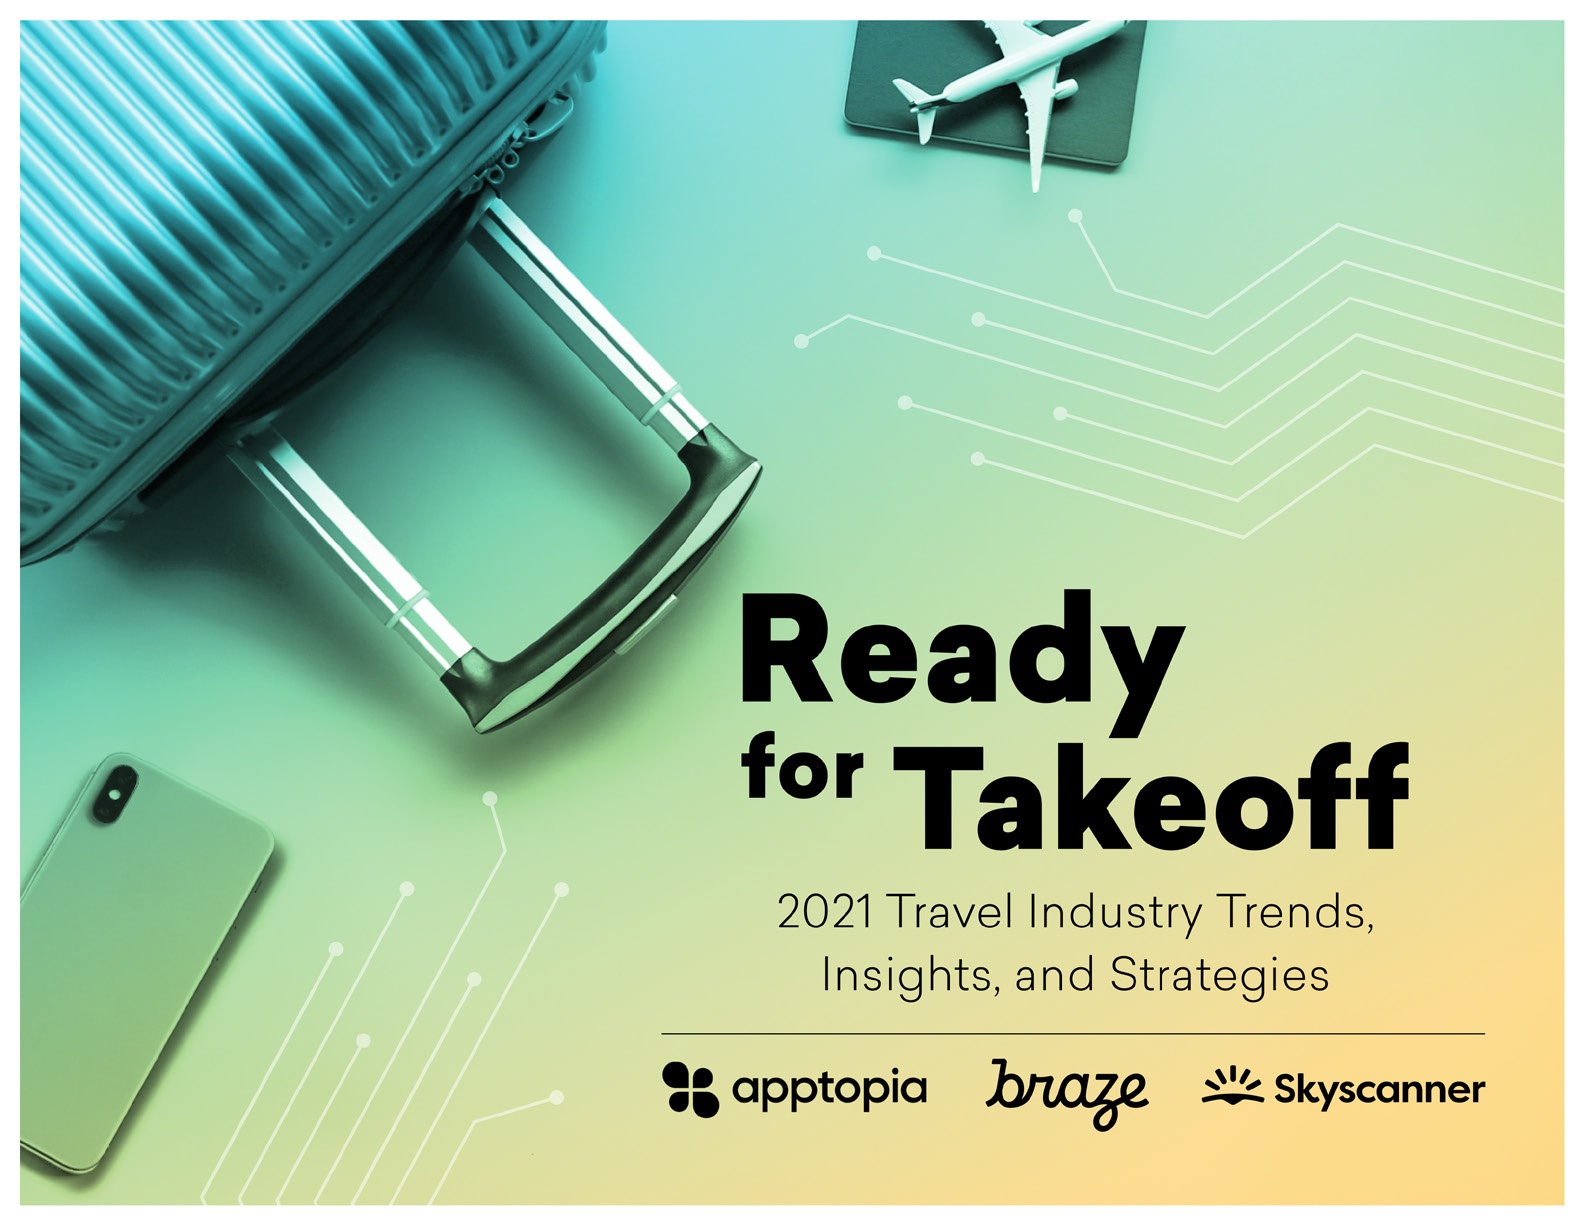 Ready for Takeoff: 2021 Travel Industry Trends, Insights, and Strategies
